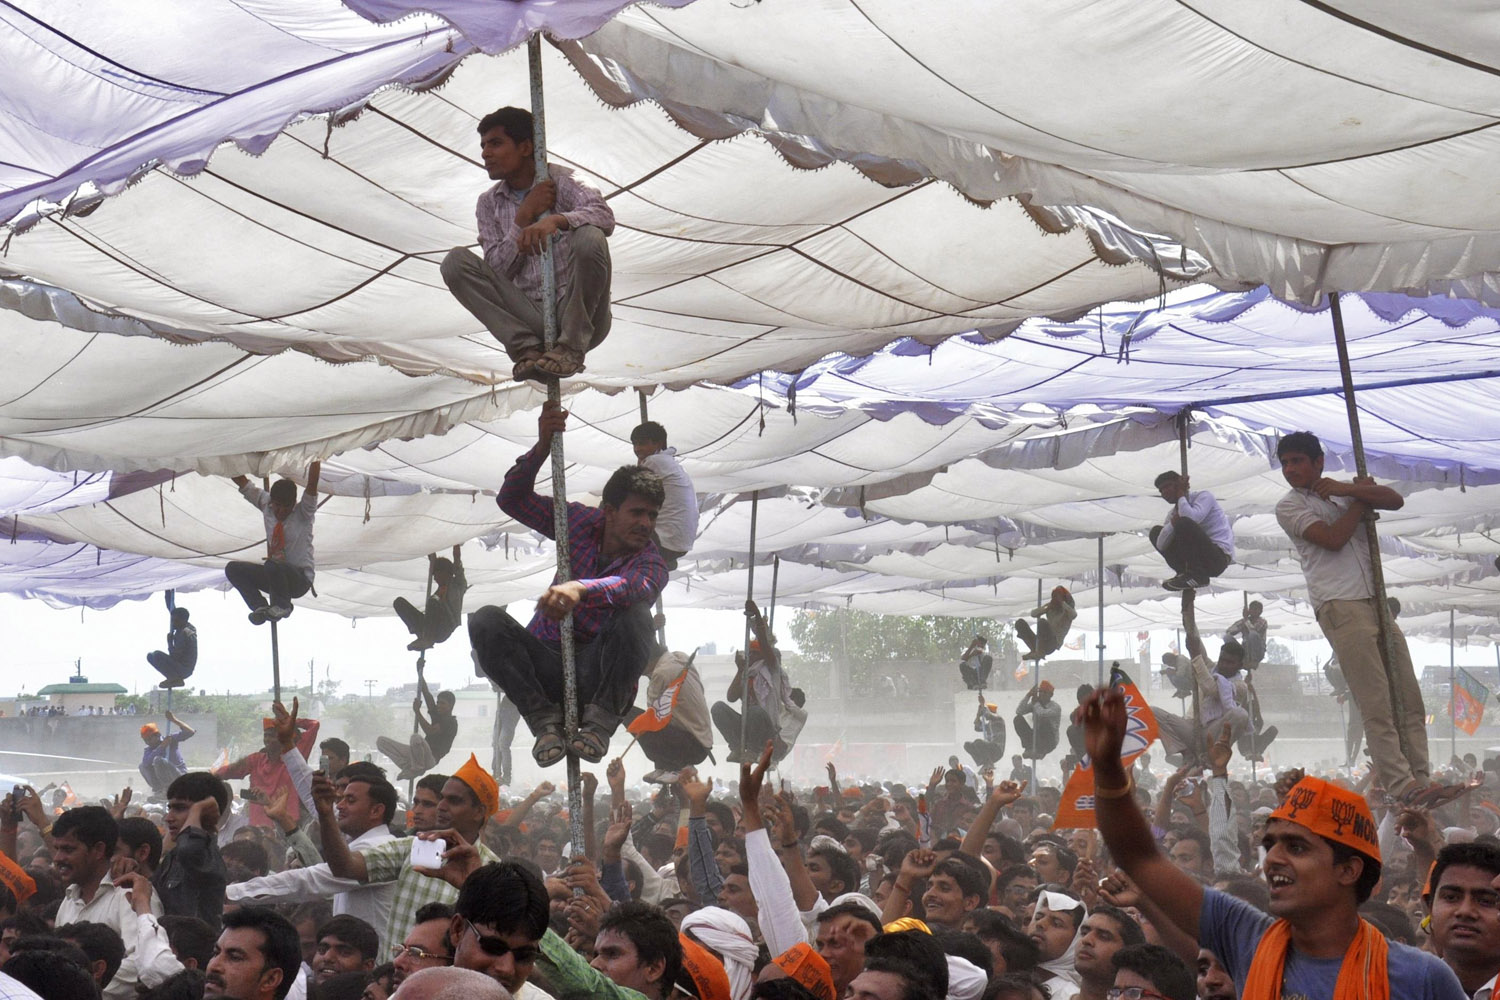 Apr. 21, 2014. Supporters of Hindu nationalist Narendra Modi, the prime ministerial candidate for India's main opposition Bharatiya Janata Party (BJP), climb over the poles of a temporary tent to get a glimpse of Modi during an election campaign rally at Mathura in the northern Indian state of Uttar Pradesh.